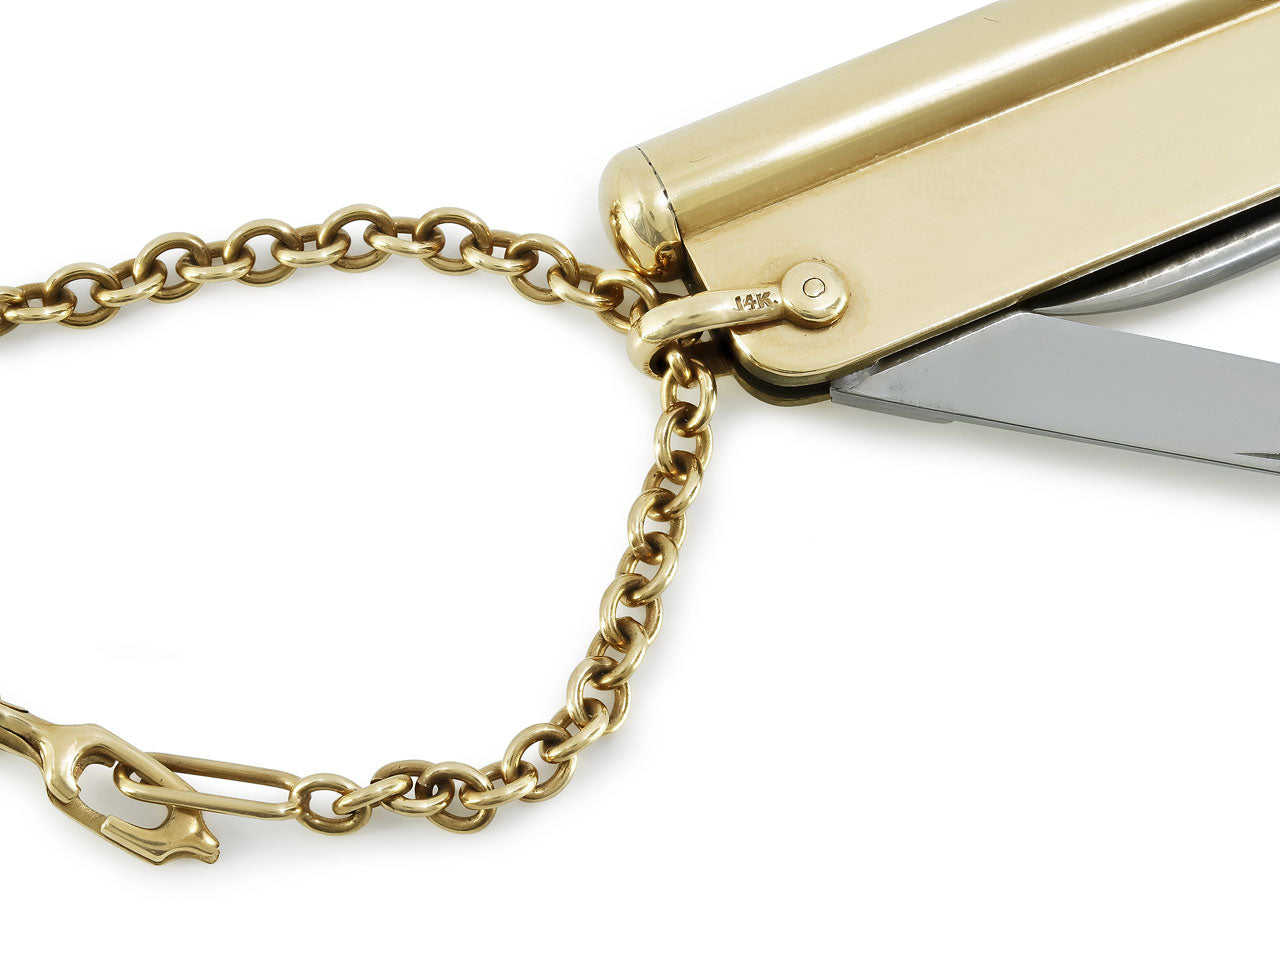 Keychain with Pocket Knife and Key Blank in 14K Gold